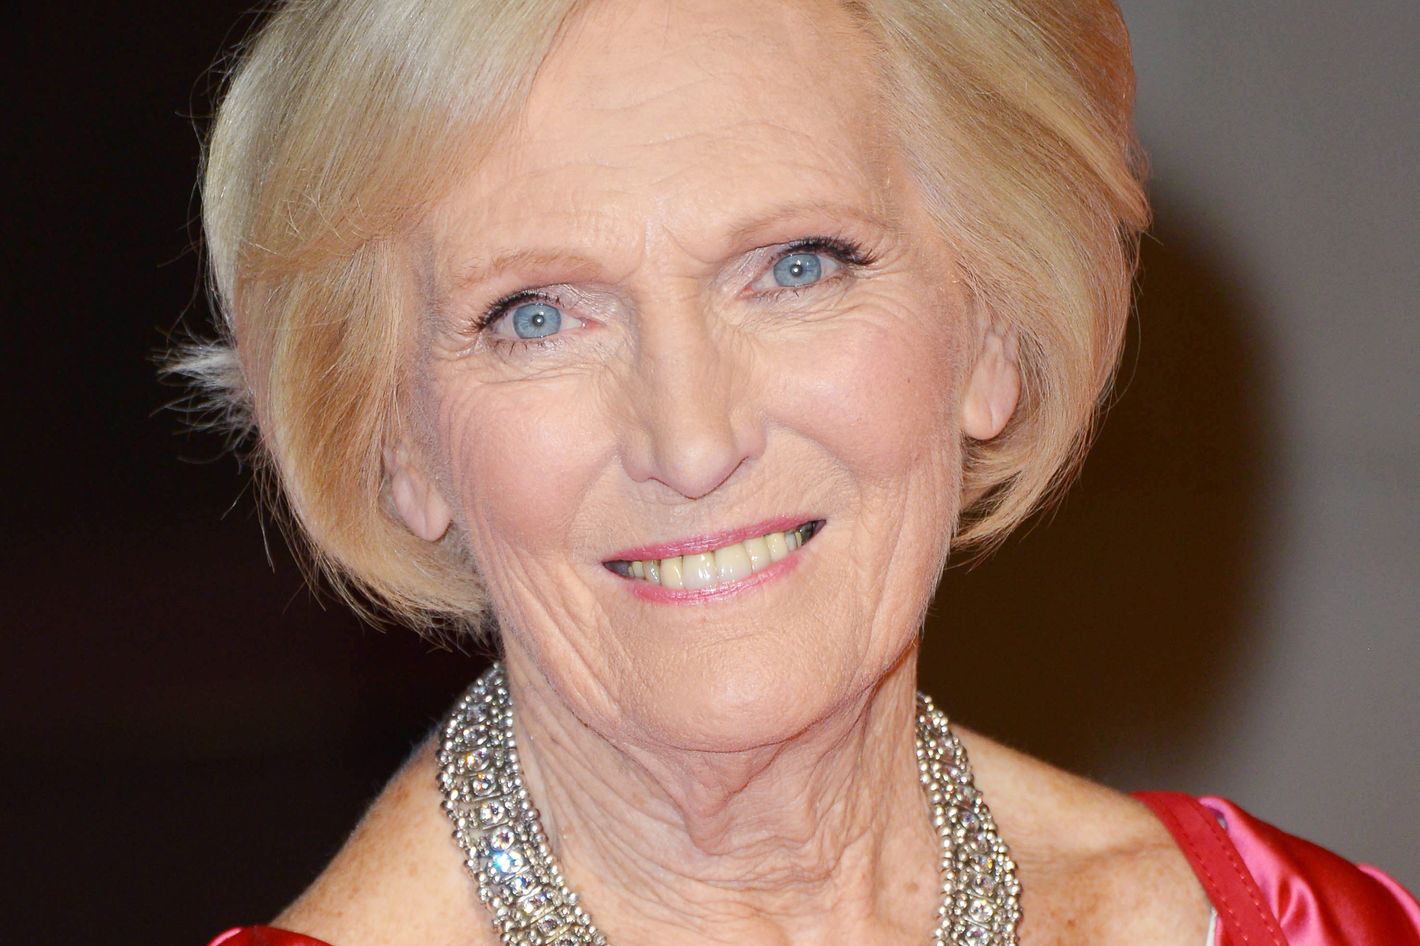 9 ageless style lessons to learn from soon-to-be-Dame Mary Berry